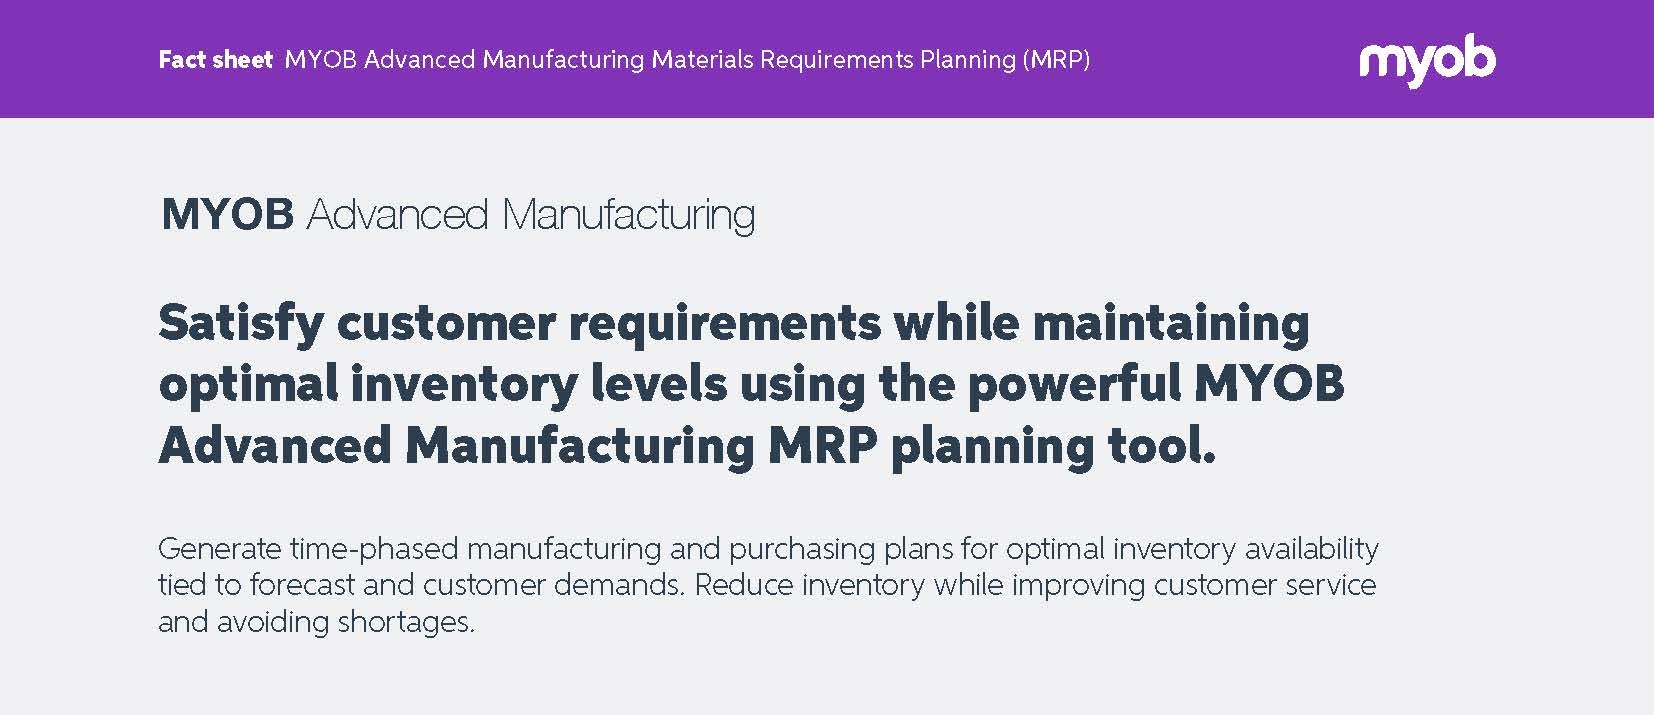 MYOB-Advanced-Manufacturing-Material-Requirements-Planning-FactSheet